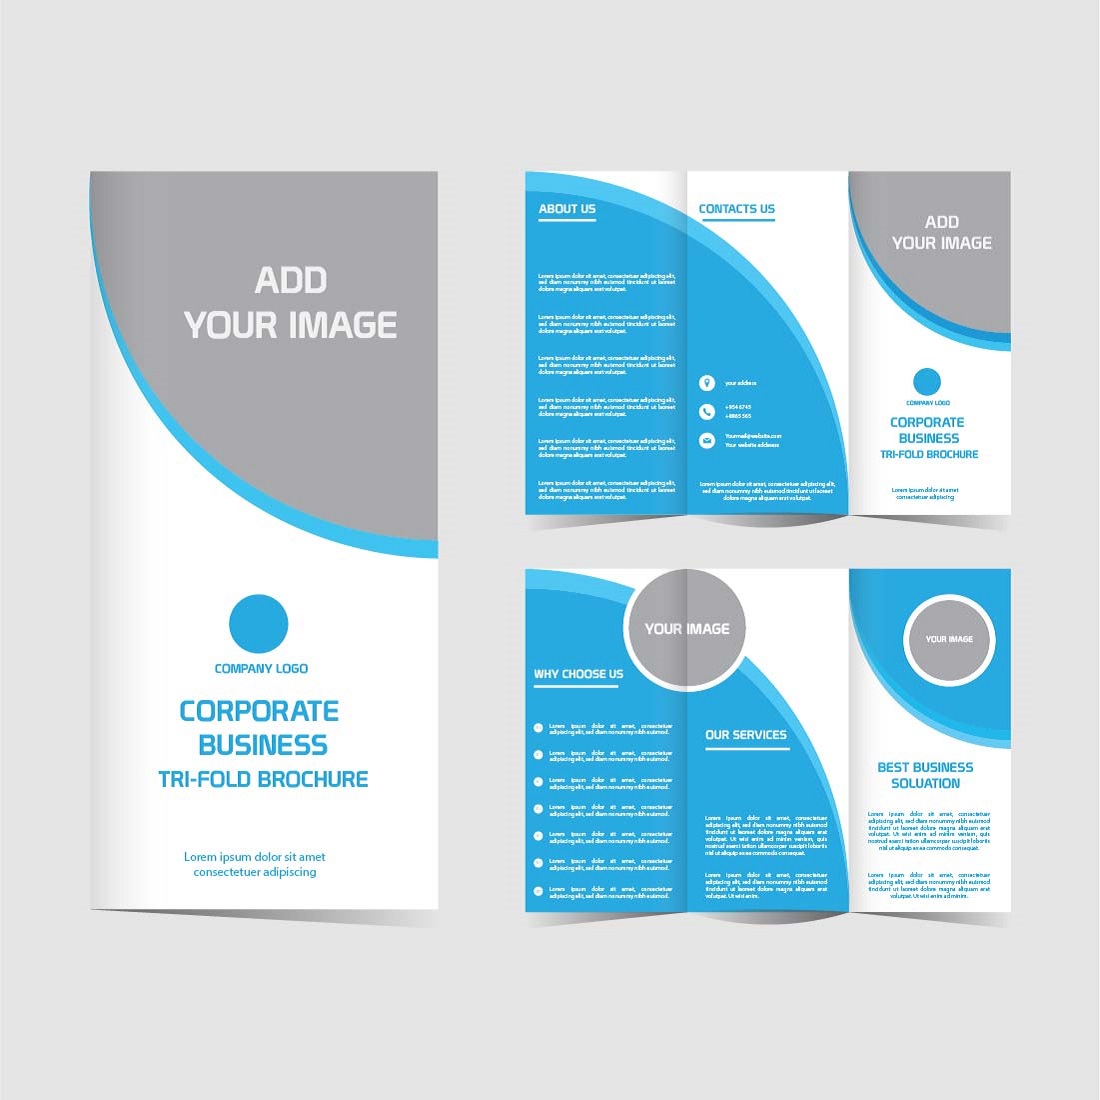 Corporate business trifold brochure design set editable and resizable preview image.